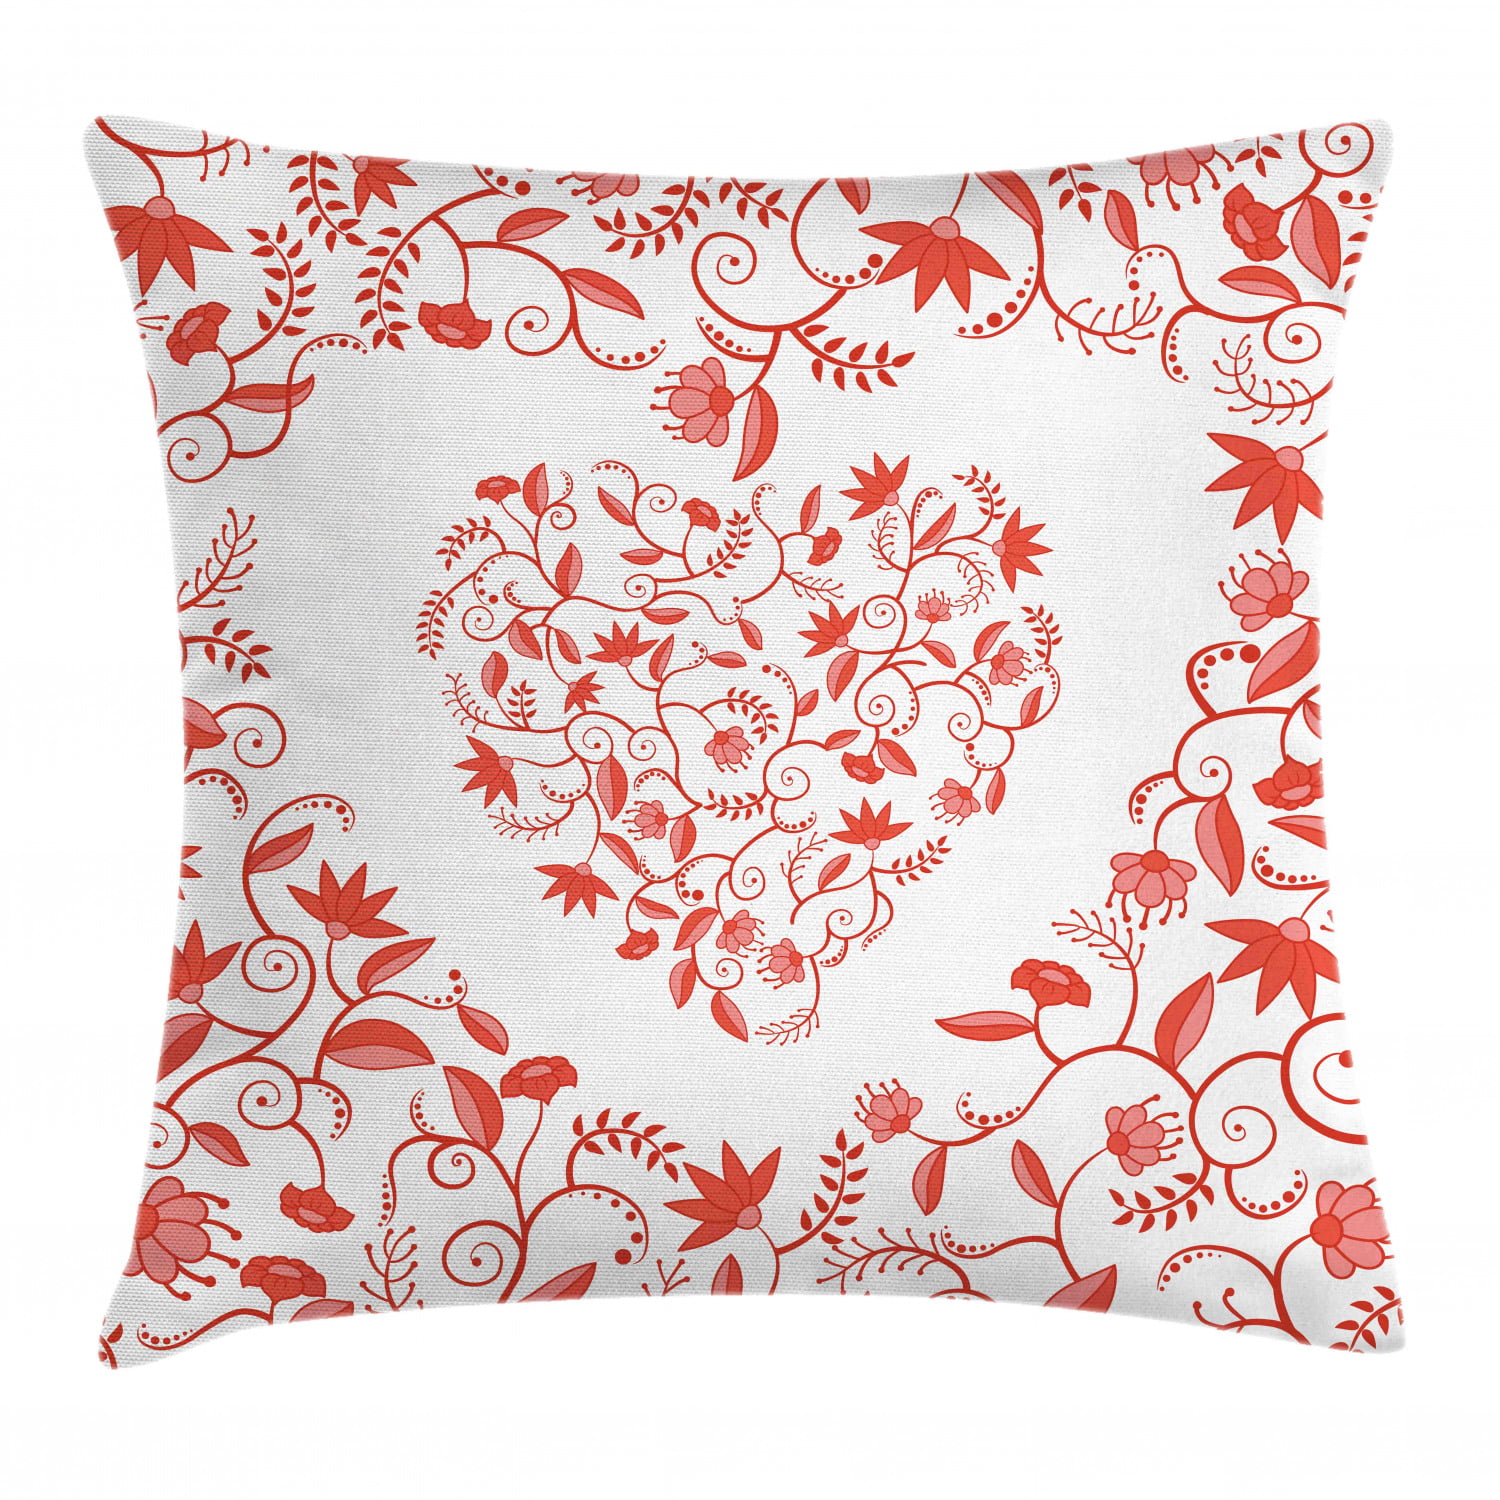 26 X 16 Ambesonne Valentines Day Throw Pillow Cushion Cover Decorative Rectangle Accent Pillow Case Cream Vermilion Romantic Tree with Blooming Hearts with Bike and Petals Vintage Artwork 